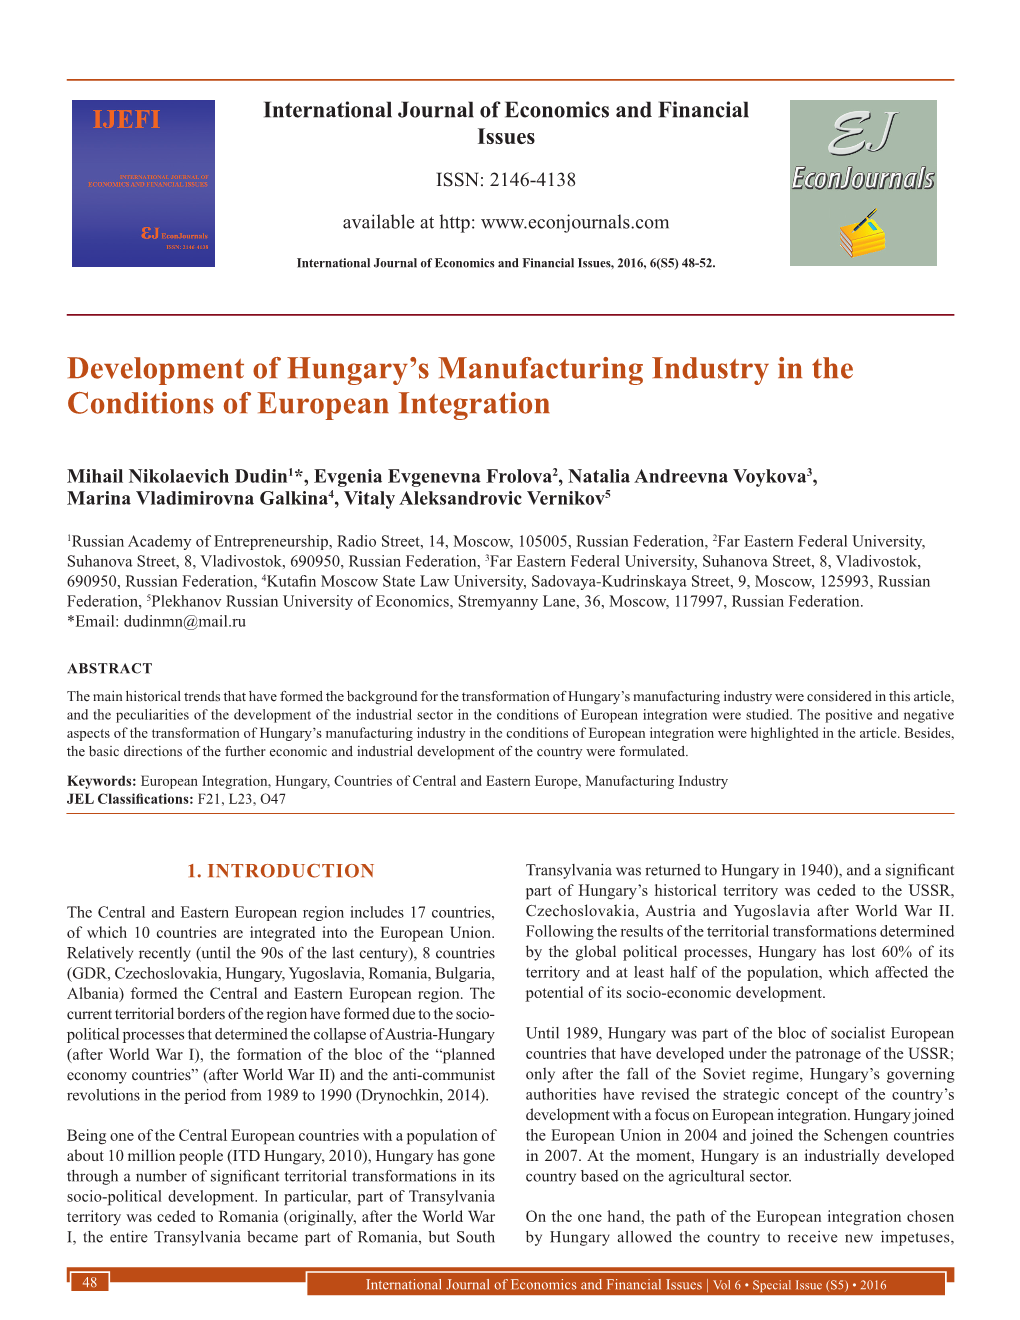 Development of Hungary's Manufacturing Industry in The